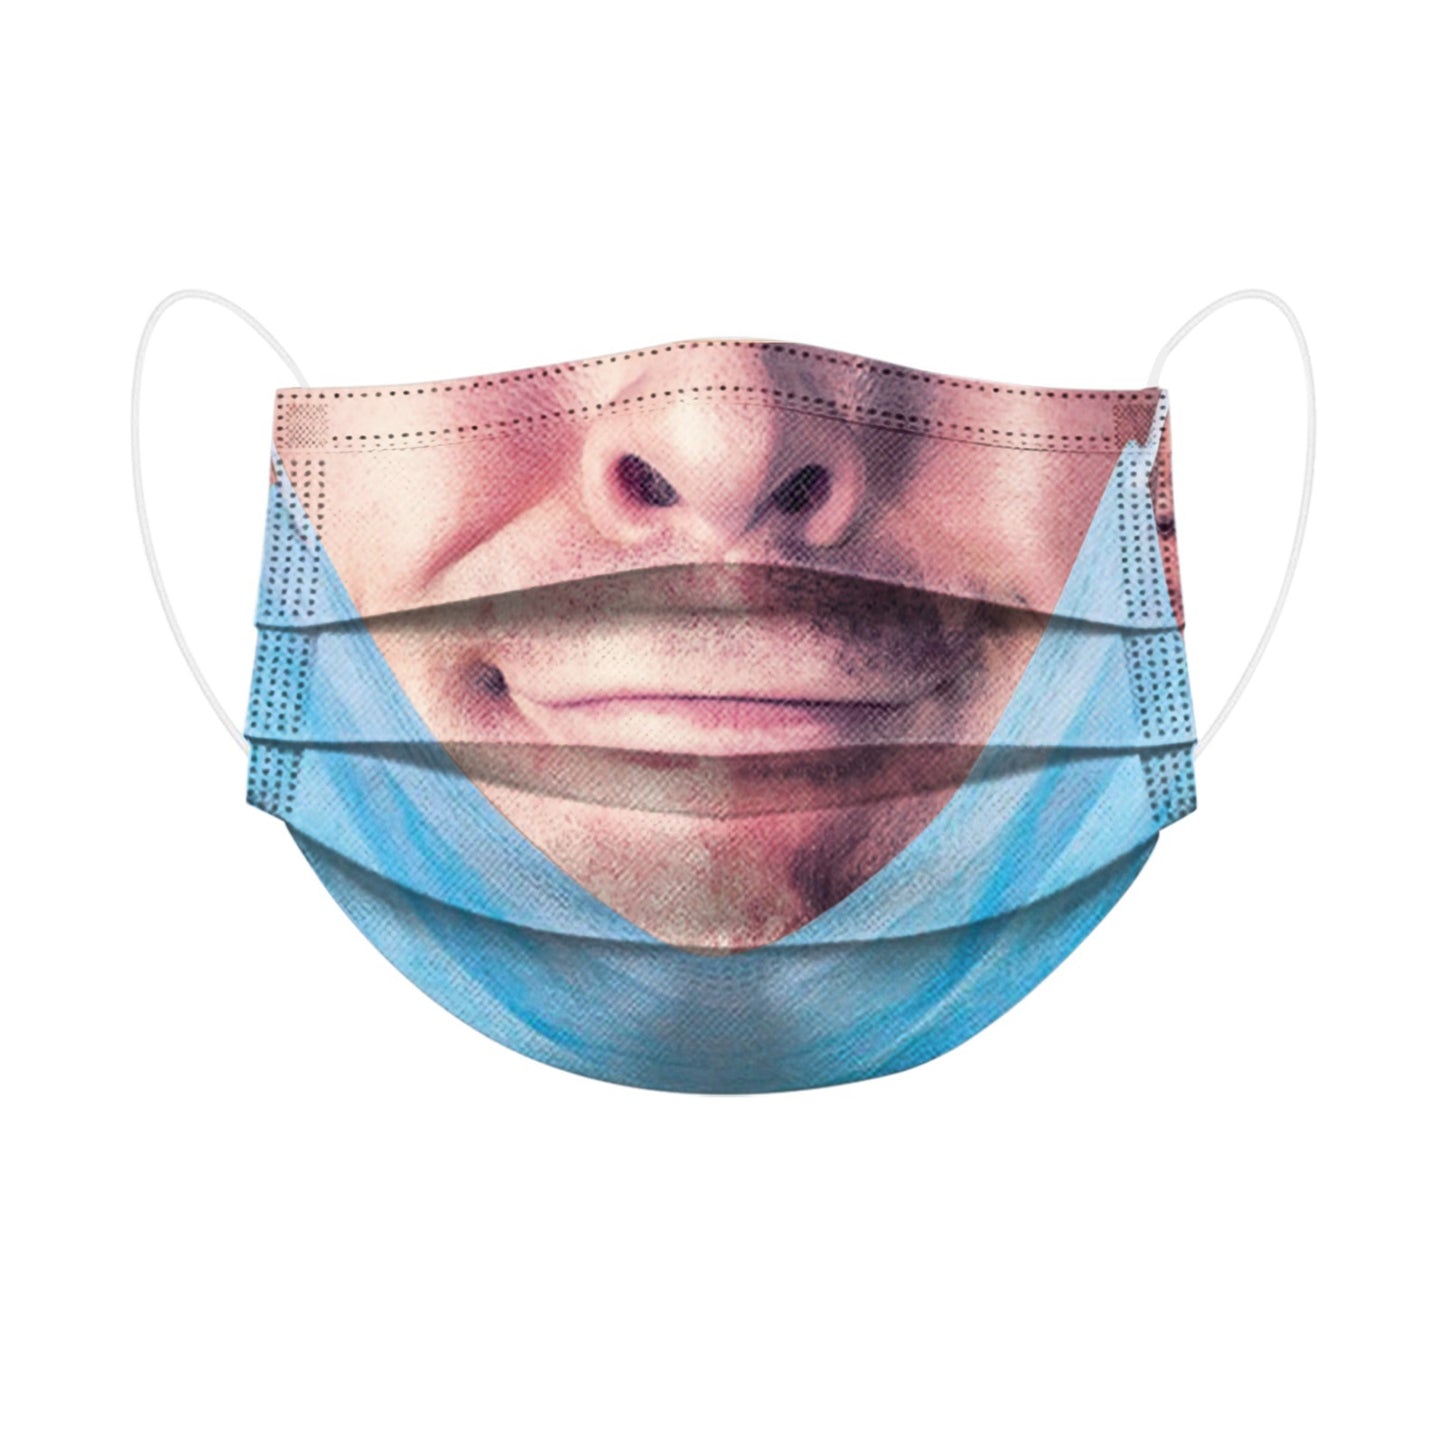 Funny Face Mask Disposable Printing Funny Protective Mask